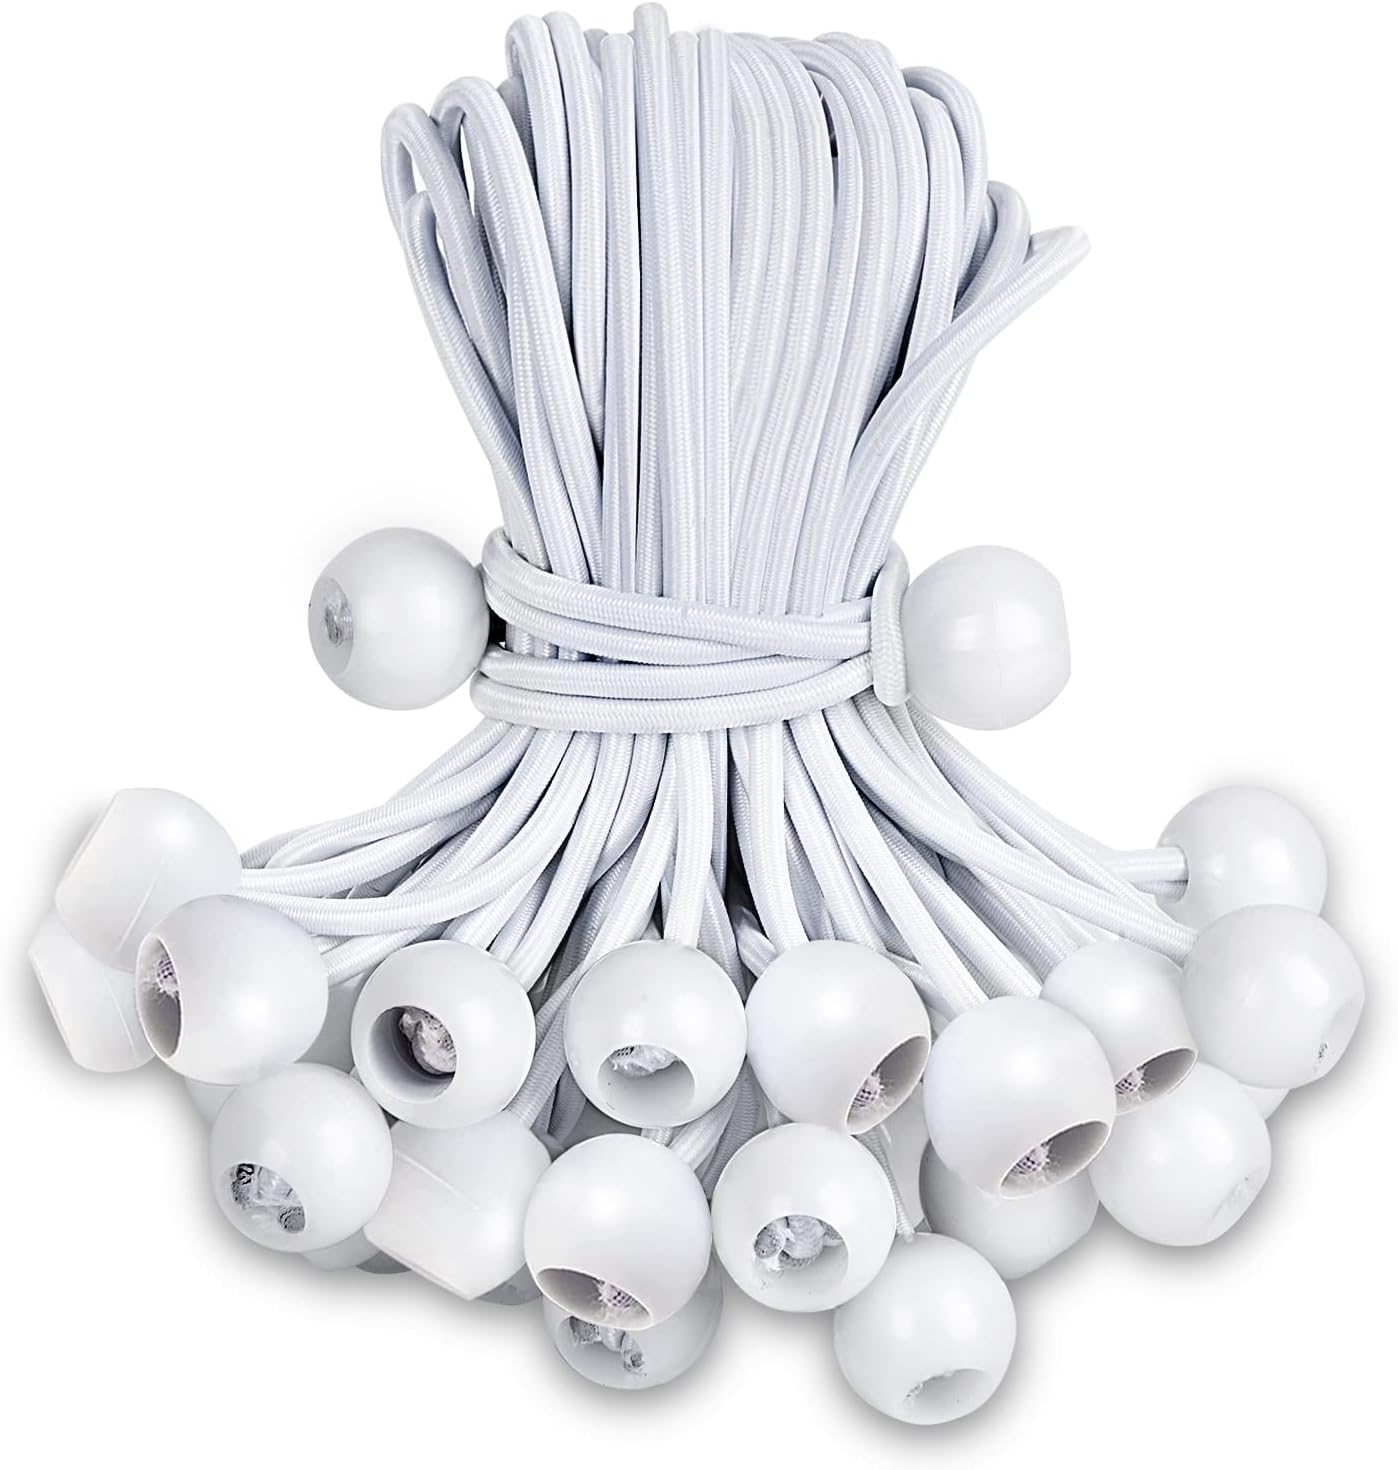 Xinji Ball Bungee Cords 6 Inch , 30 Pack Ball Bungee Cords Heavy Duty Outdoor for Camping Tarp Cargo Tent White